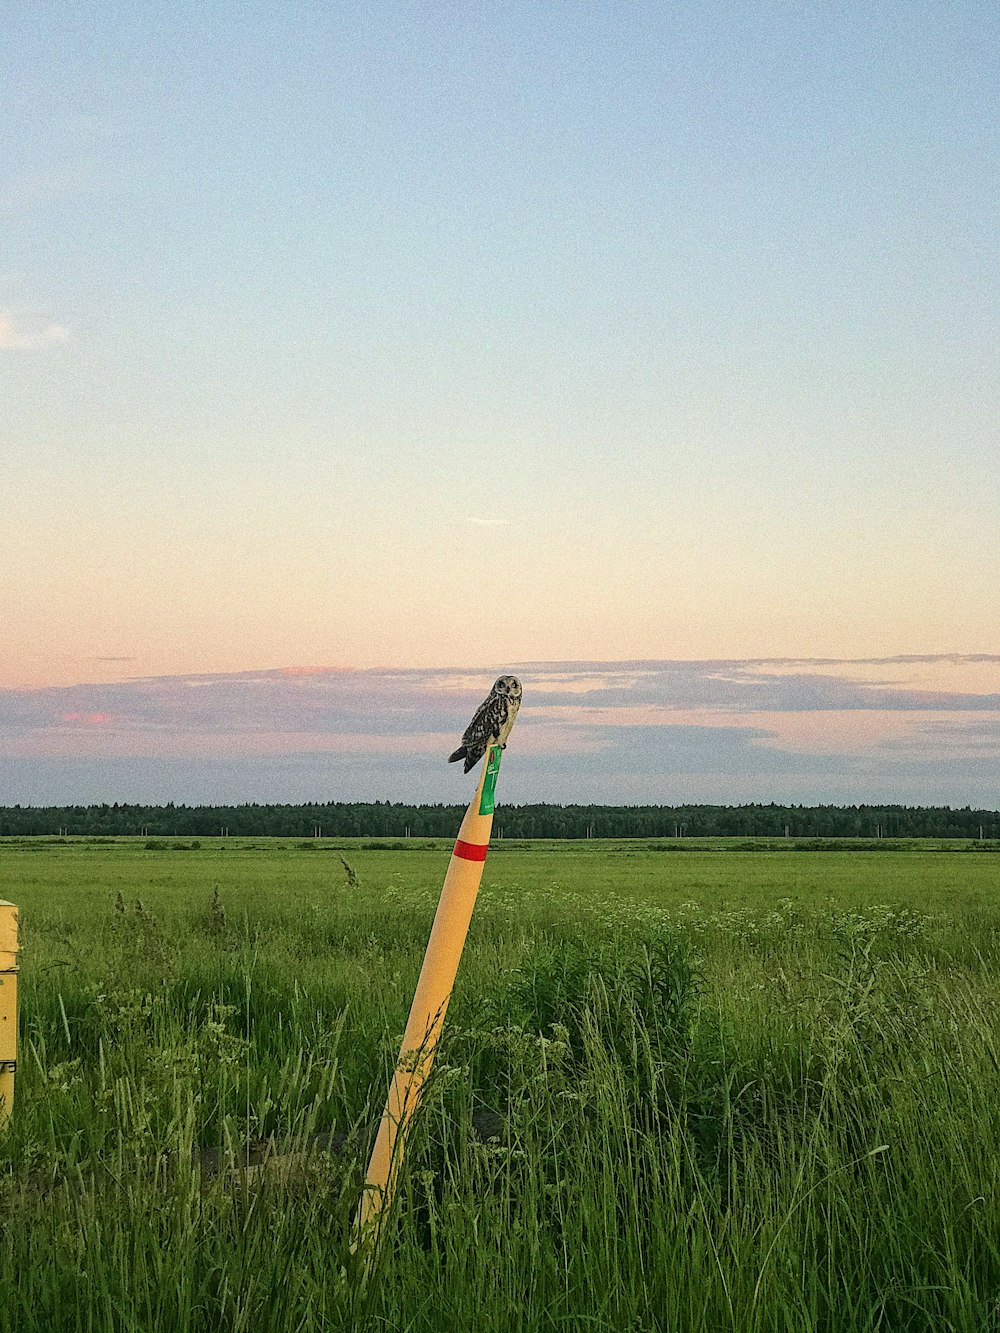 a bird perched on a pole in a field